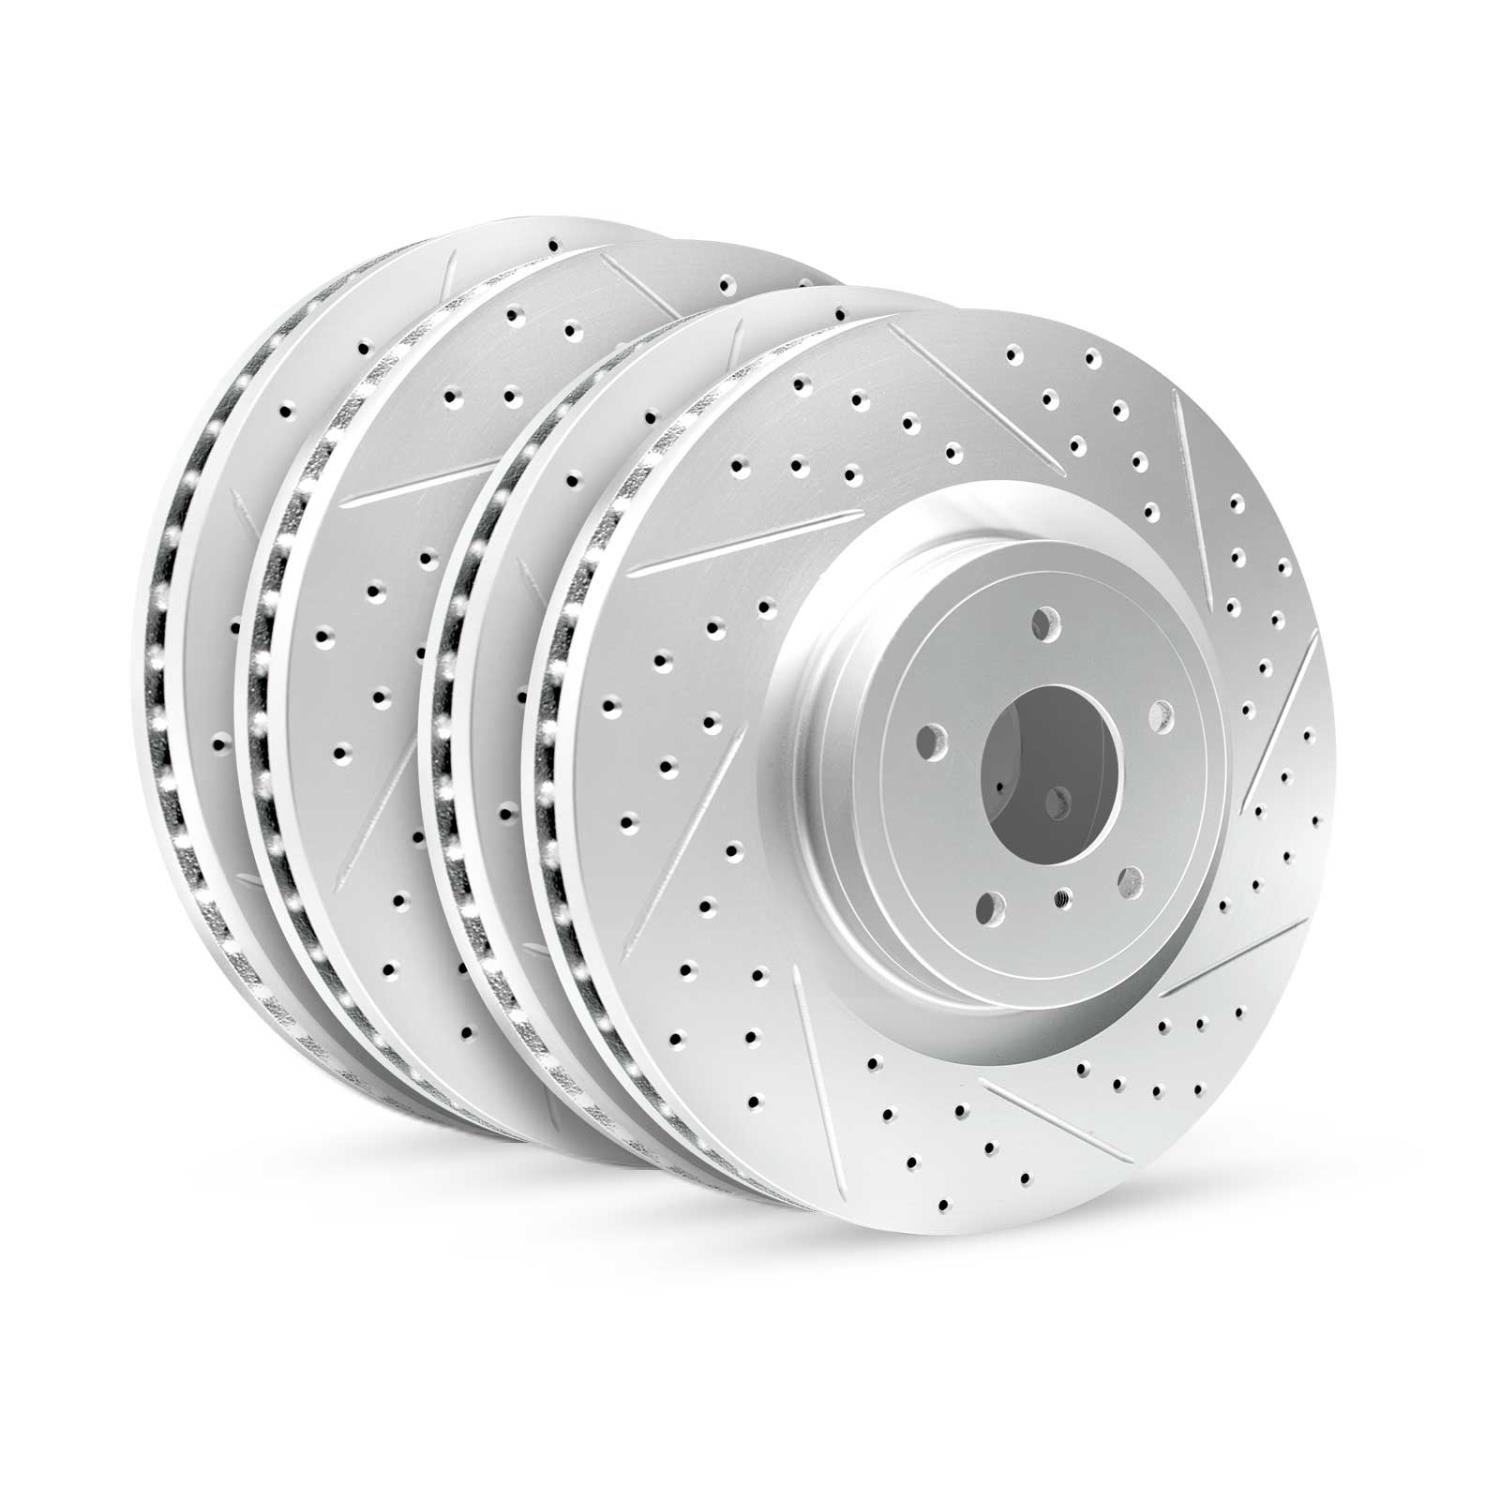 GEO-Carbon Drilled/Slotted Rotors, 2011-2011 Kia/Hyundai/Genesis, Position: Front/Rear